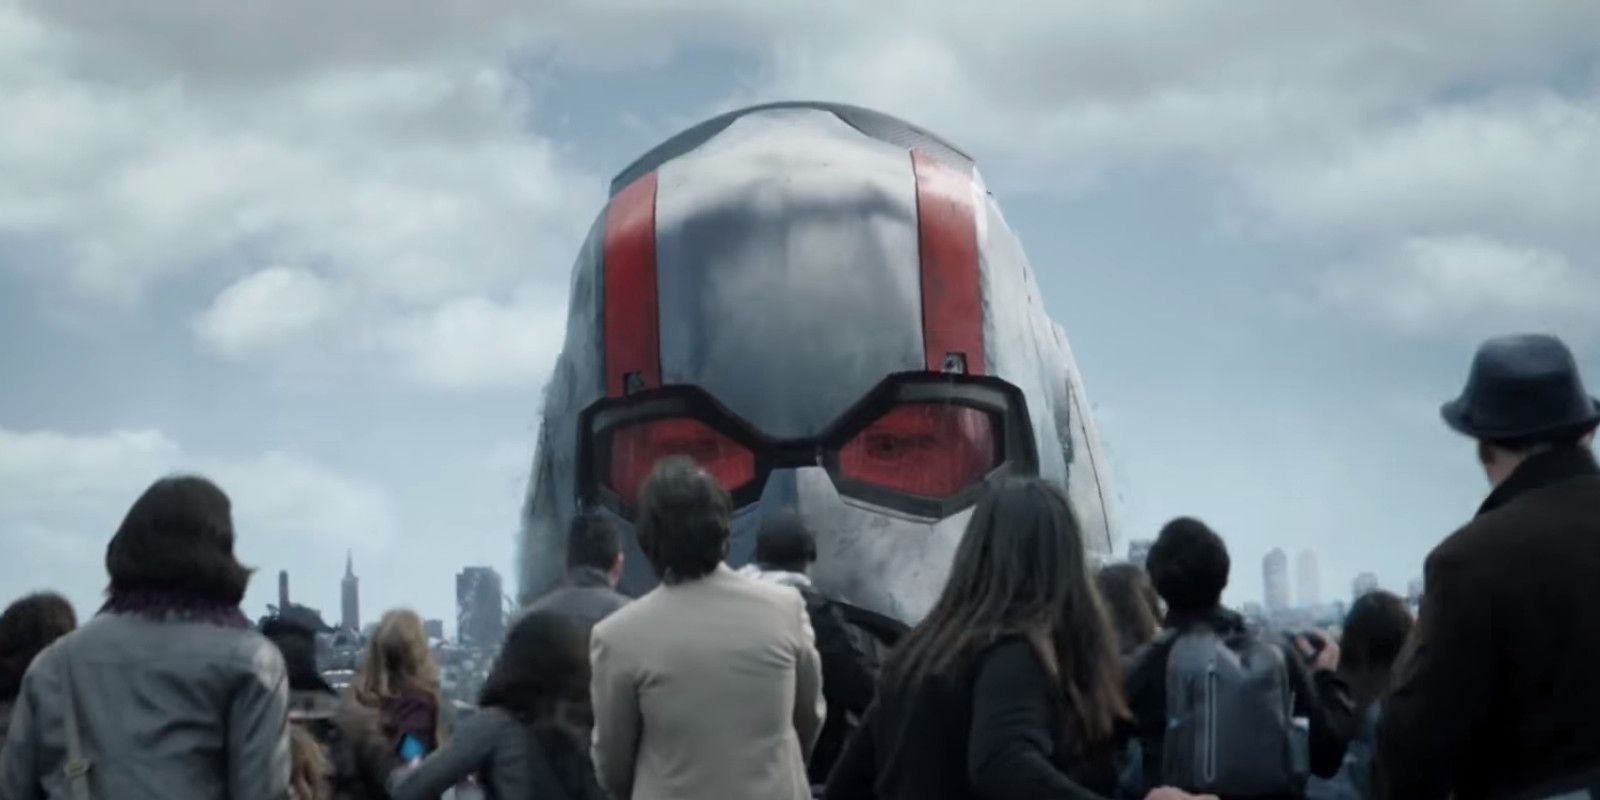 Ant Man and the Wasp Giant Man Looks at Crowd